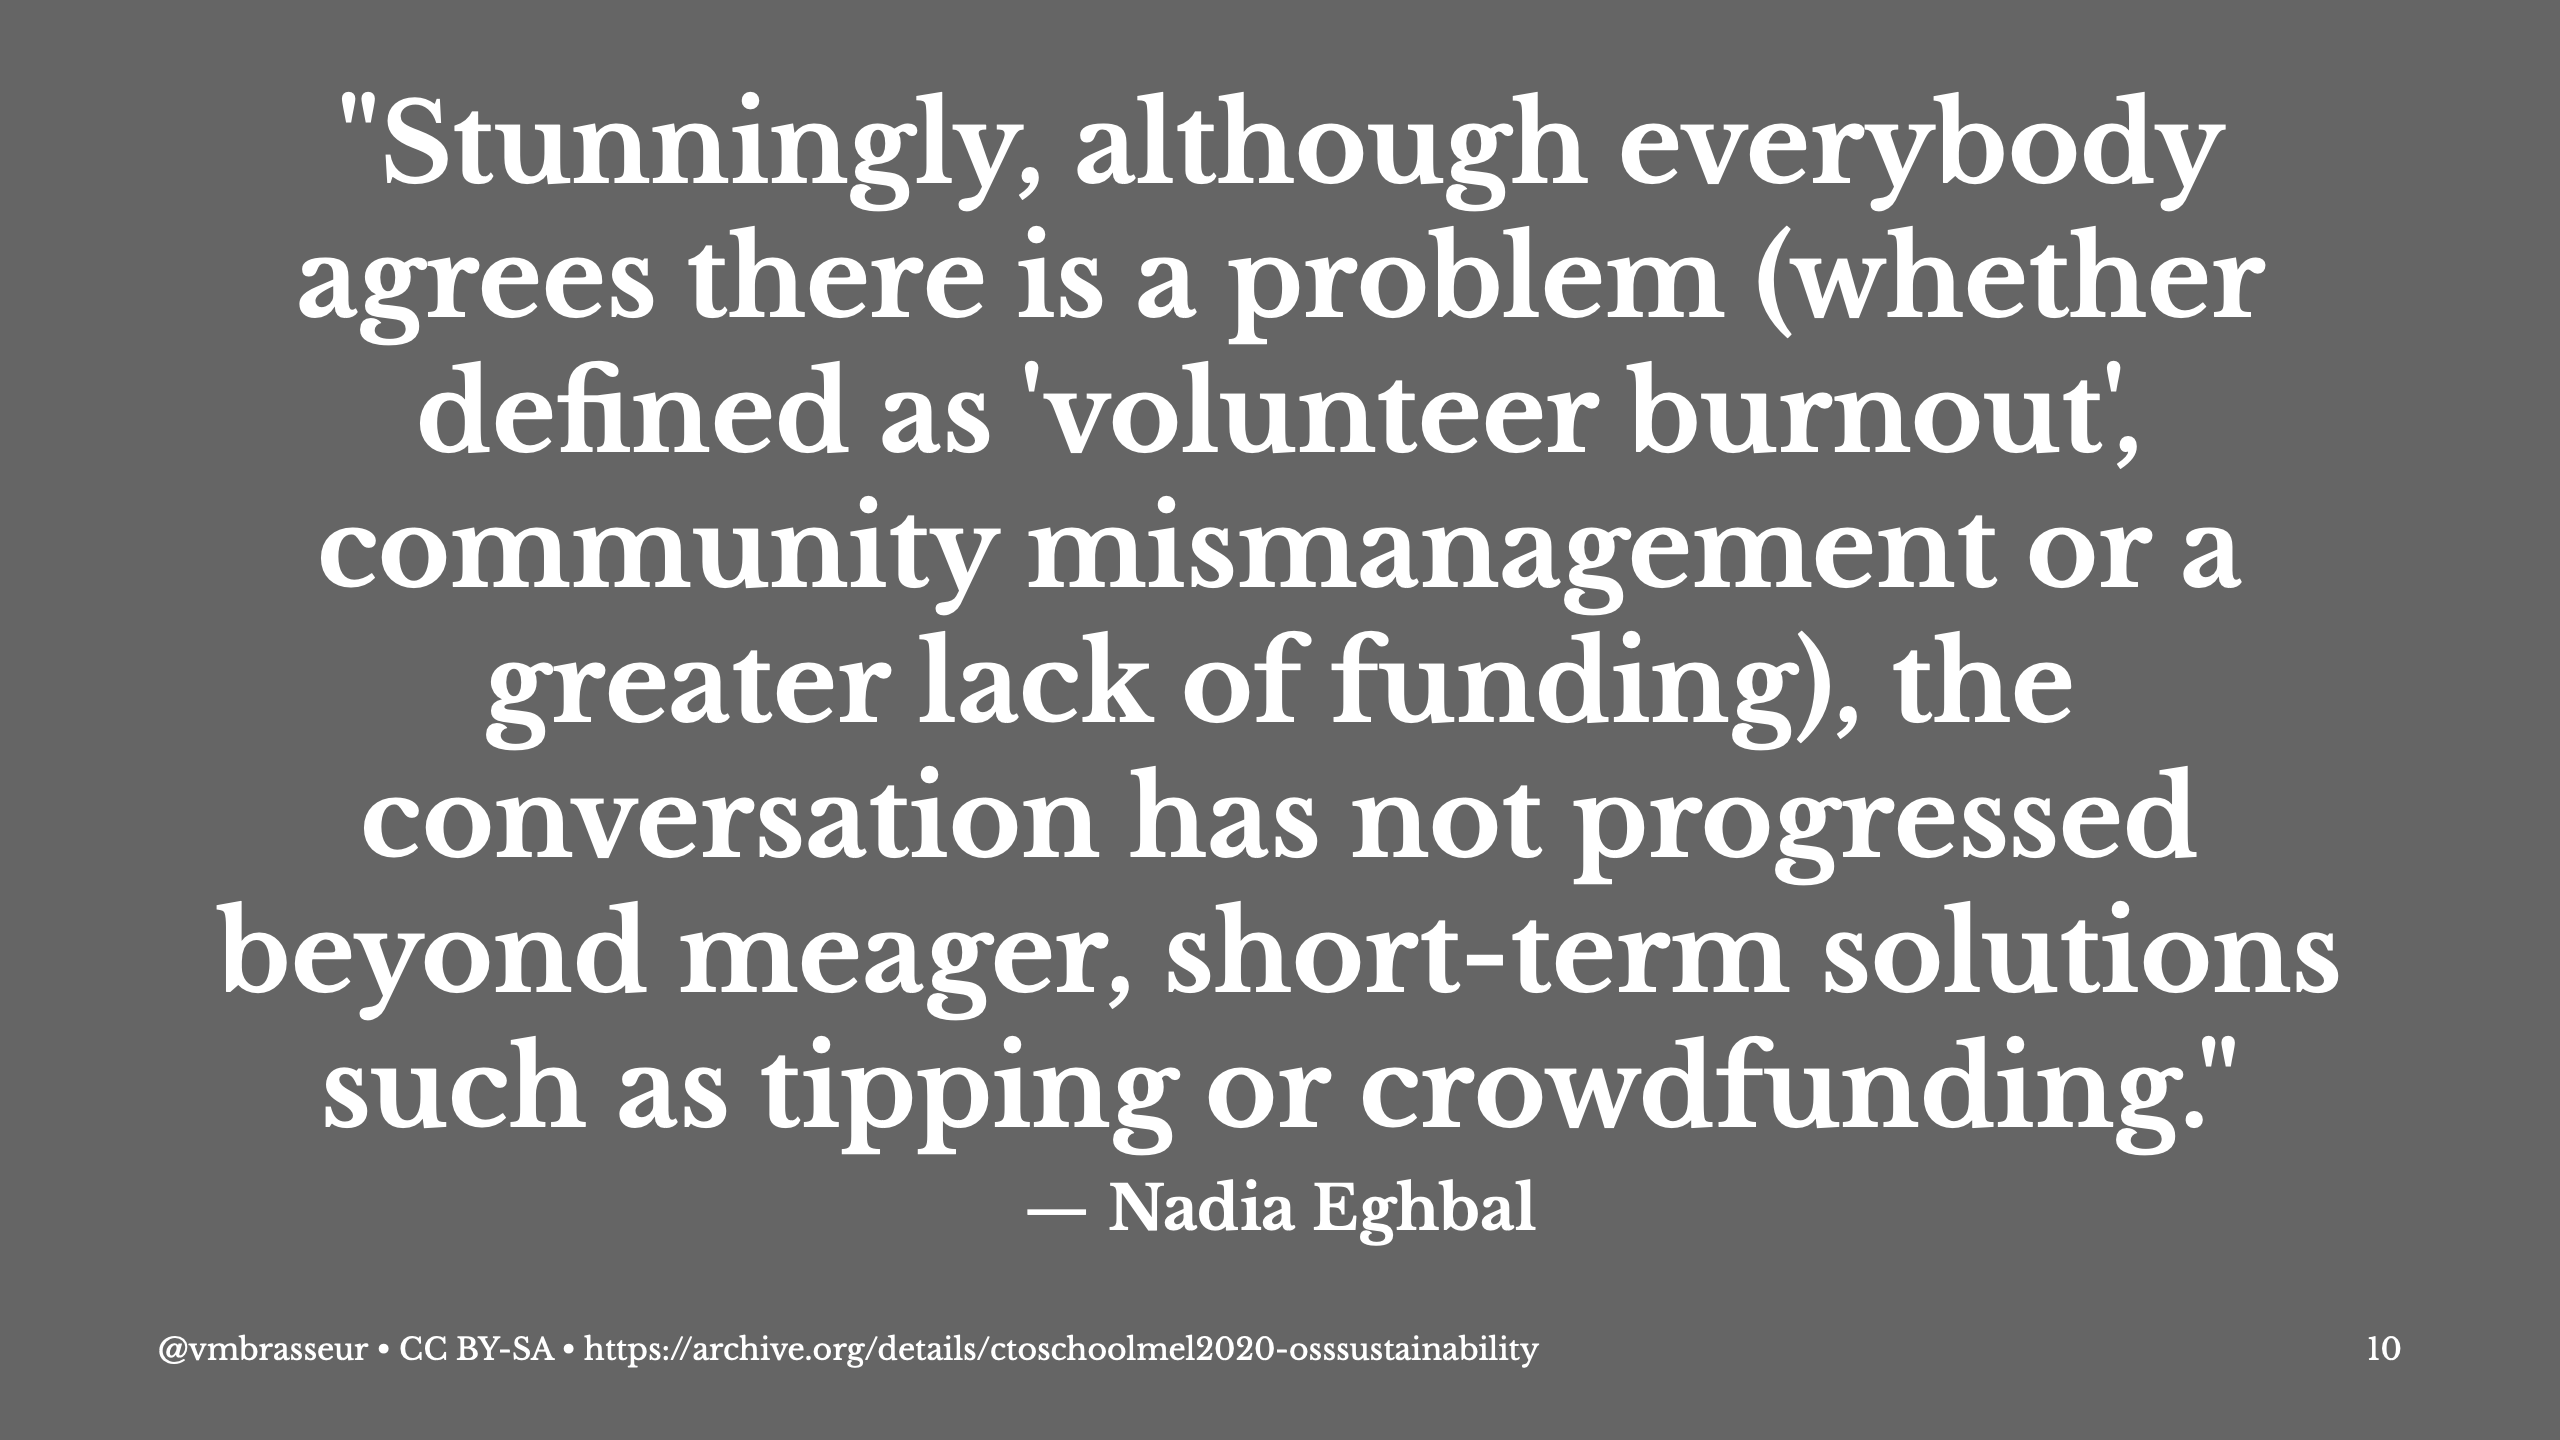 Quote from Nadia's report: Stunningly, although everybody agrees there is a problem (whether defined as volunteer burnout, community mismanagement, or a greater lack of funding), the conversation has not progressed beyond meager, short-term solutions such as tipping or crowdfunding.